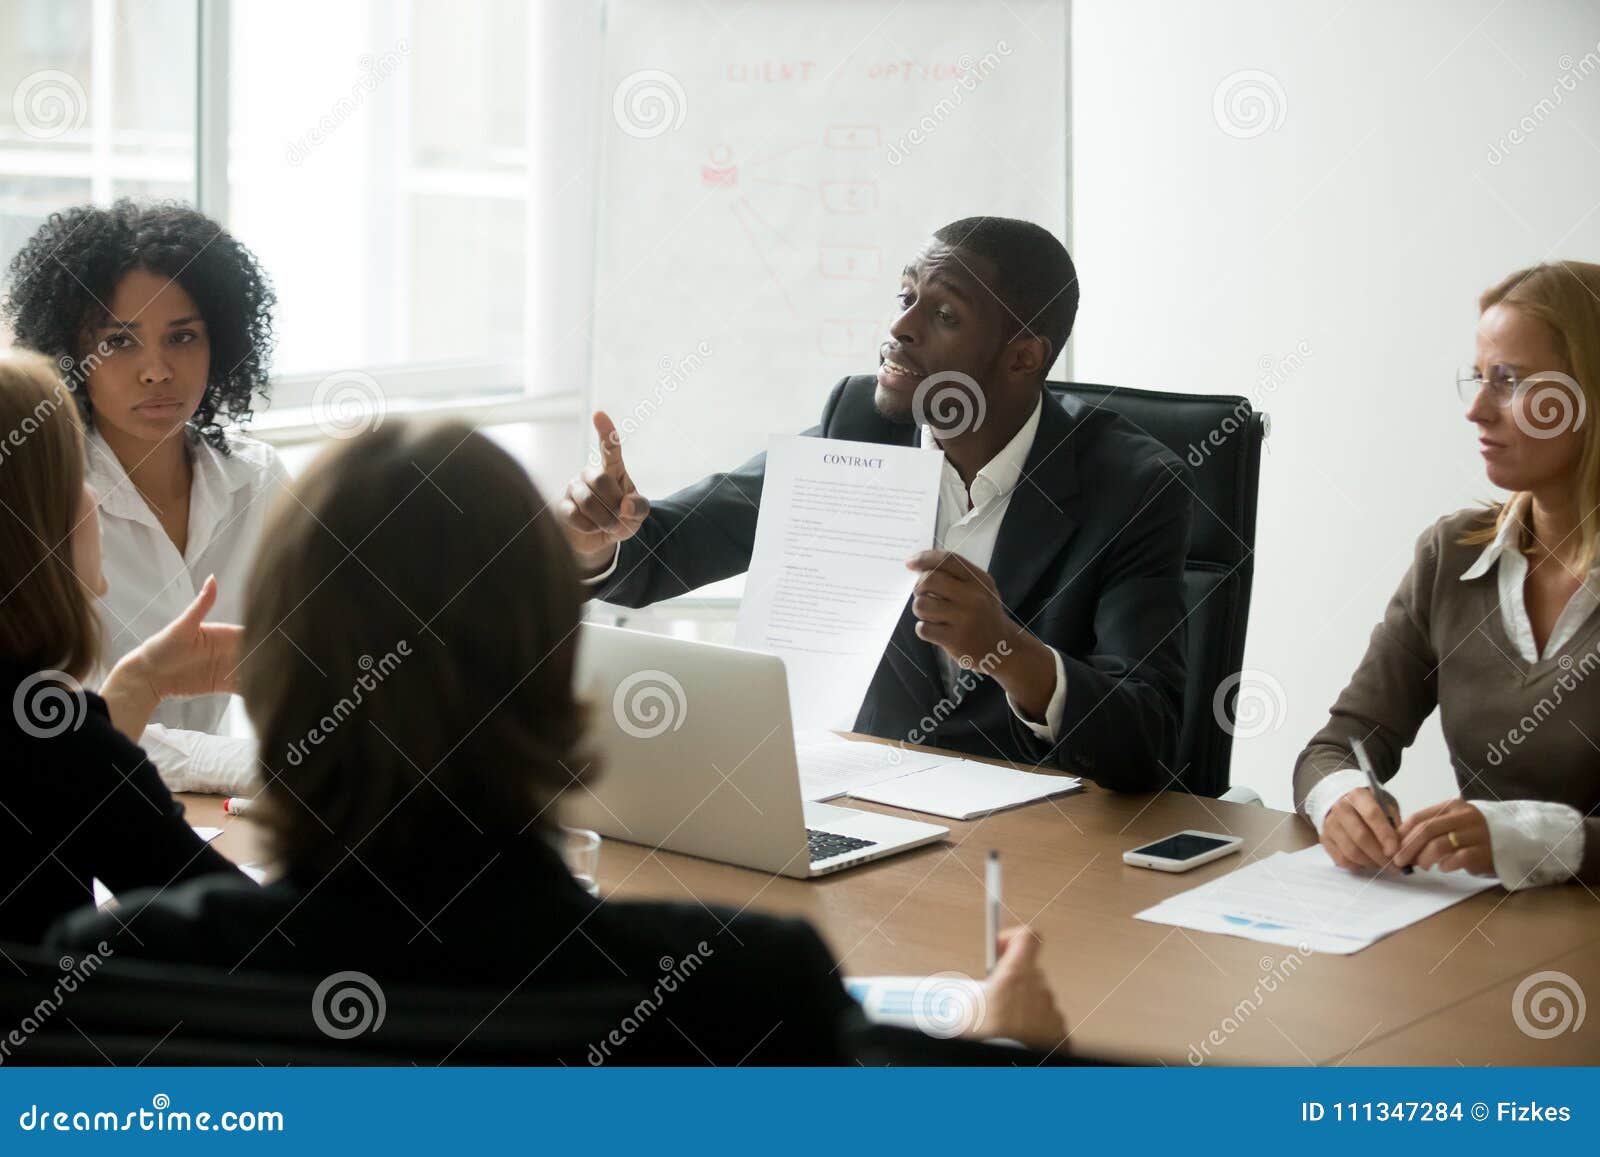 african-american-businessman-disagreeing-contract-terms-group-multi-ethnic-negotiations-black-partner-arguing-deal-111347284.jpg